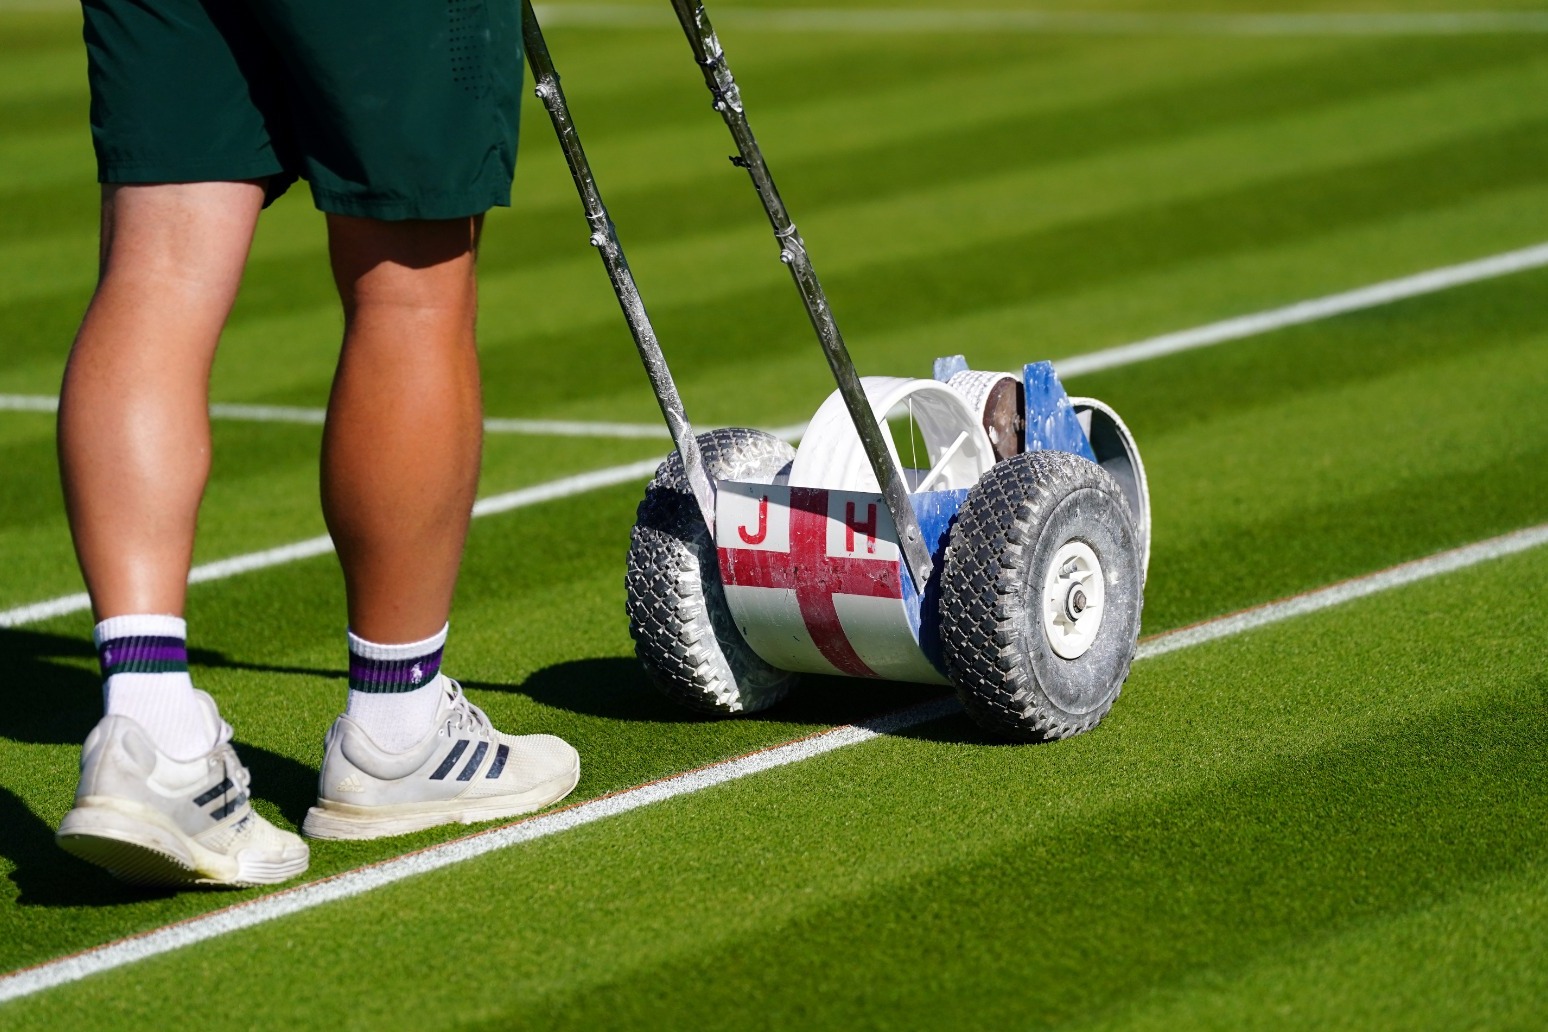 Thousands arrive at Wimbledon for first full capacity tournament in three years